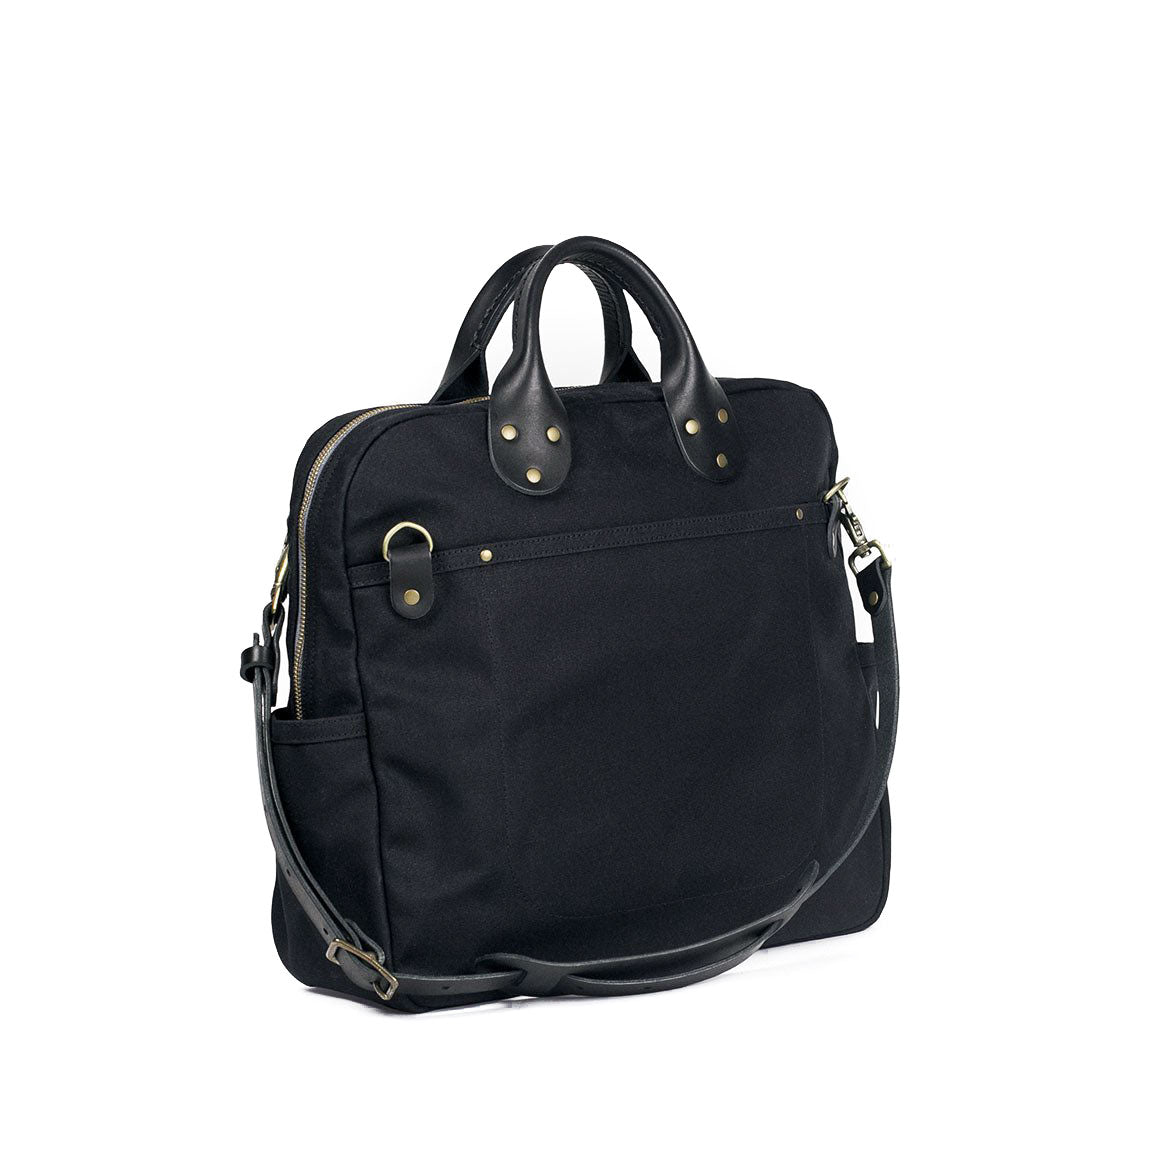 Everyday Bag Black Waxed Canvas & Black Leather